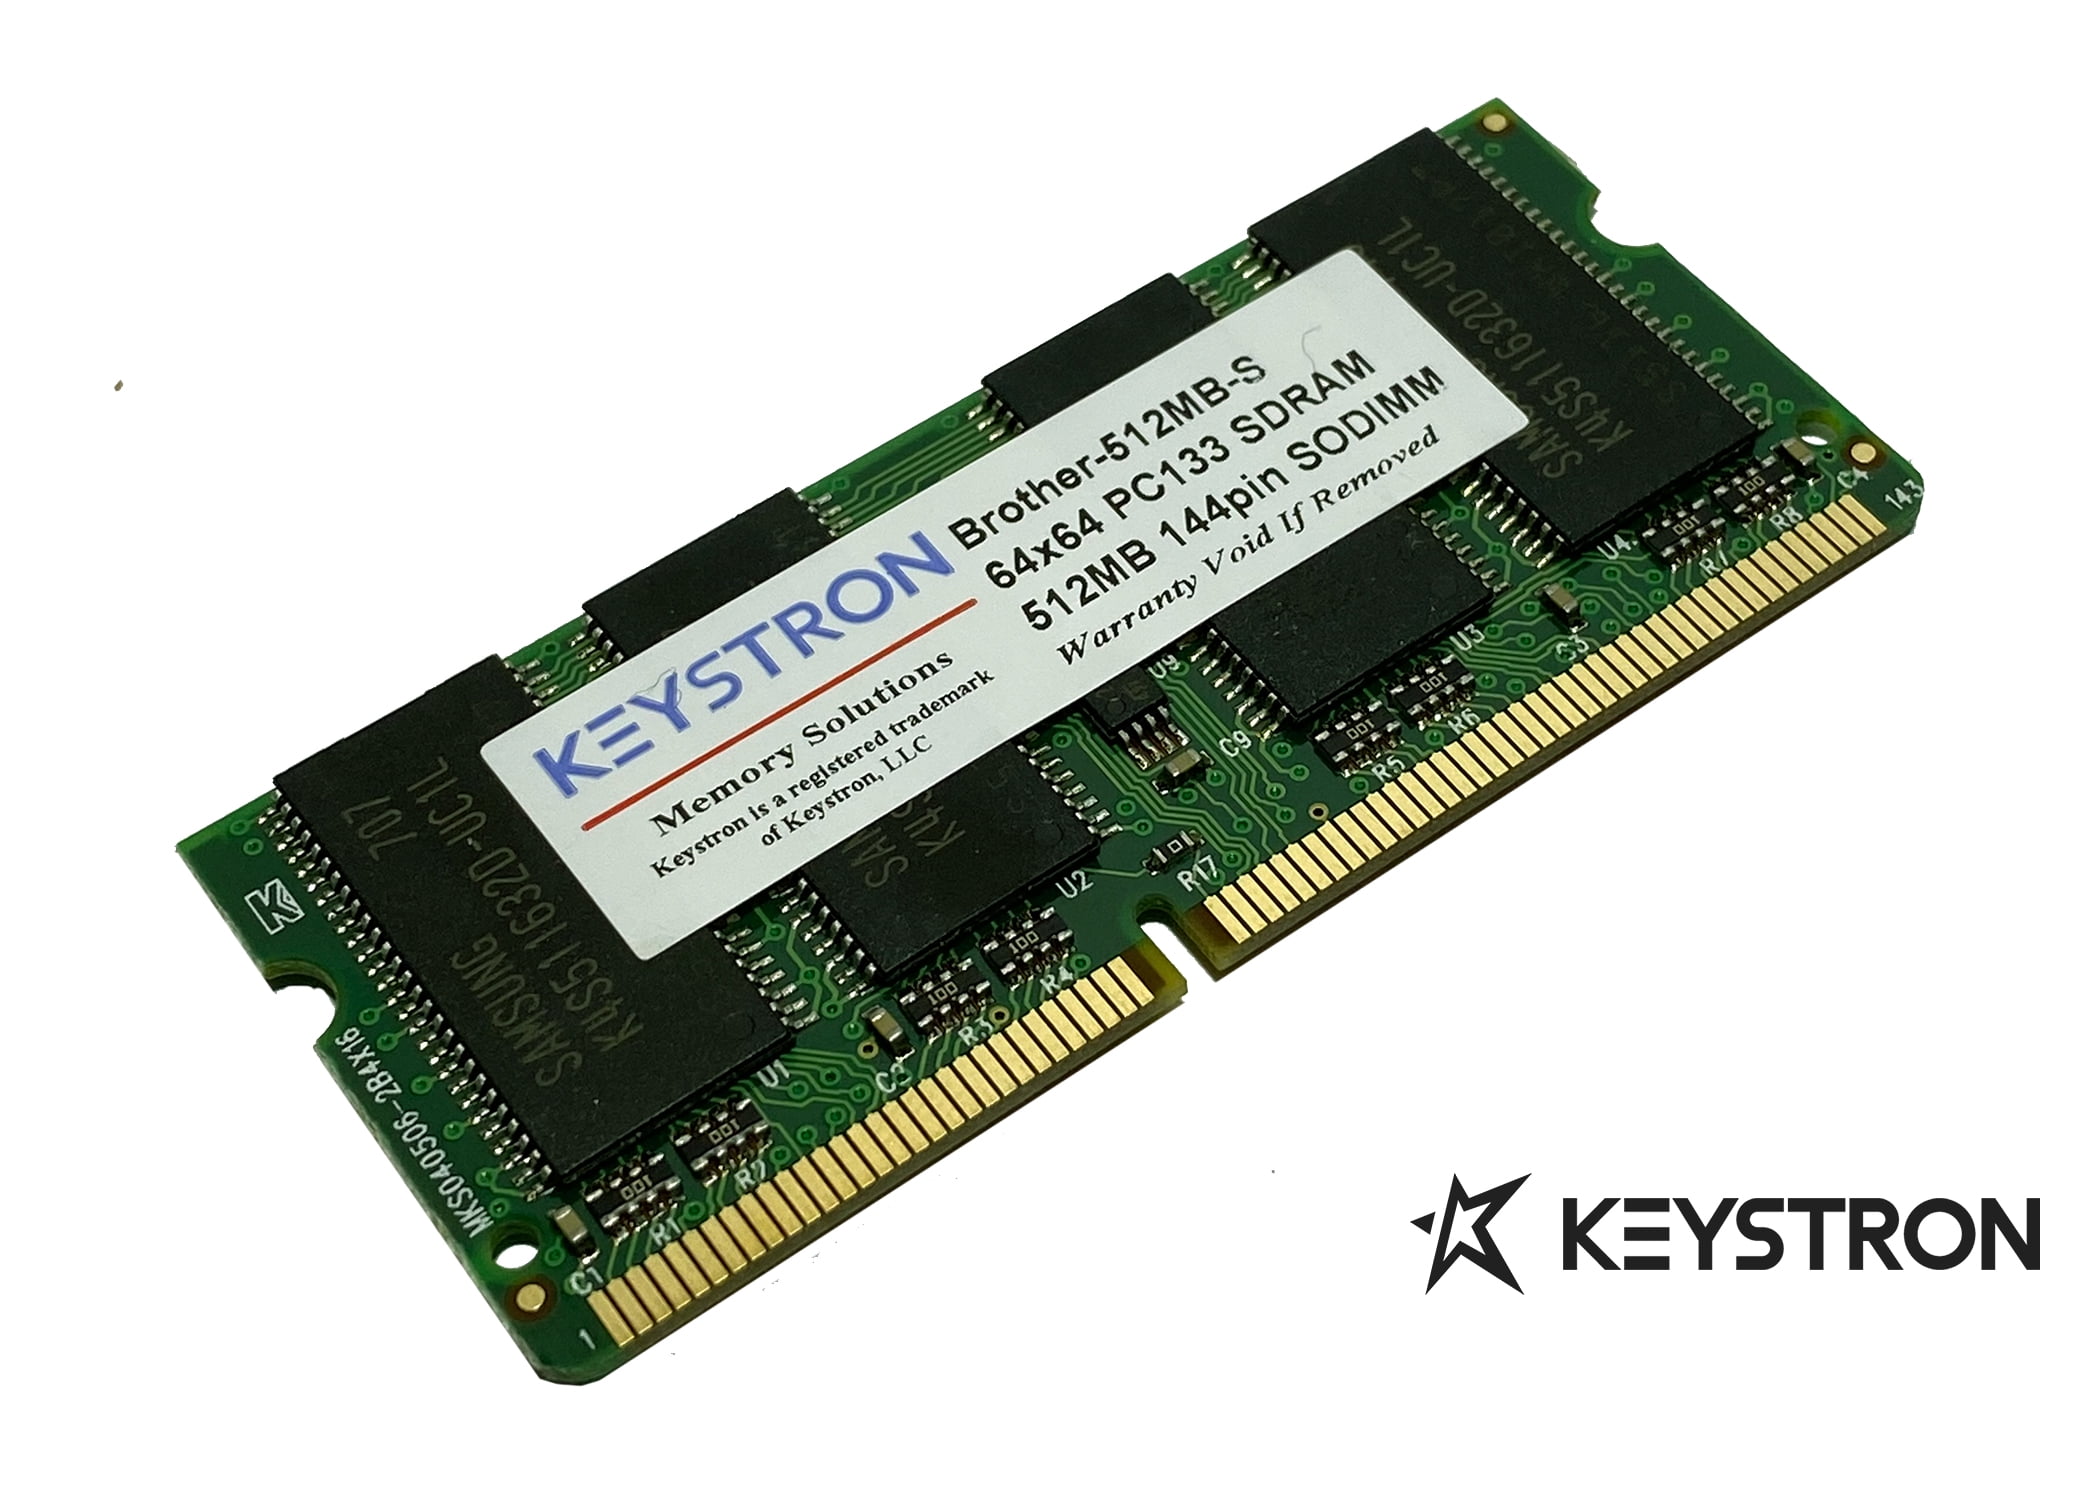 PARTS-QUICK 512MB PC133 144 pin SDRAM SODIMM Memory for Brother Printer MFC-8680DN MFC-8880DN MFC-8890DW 